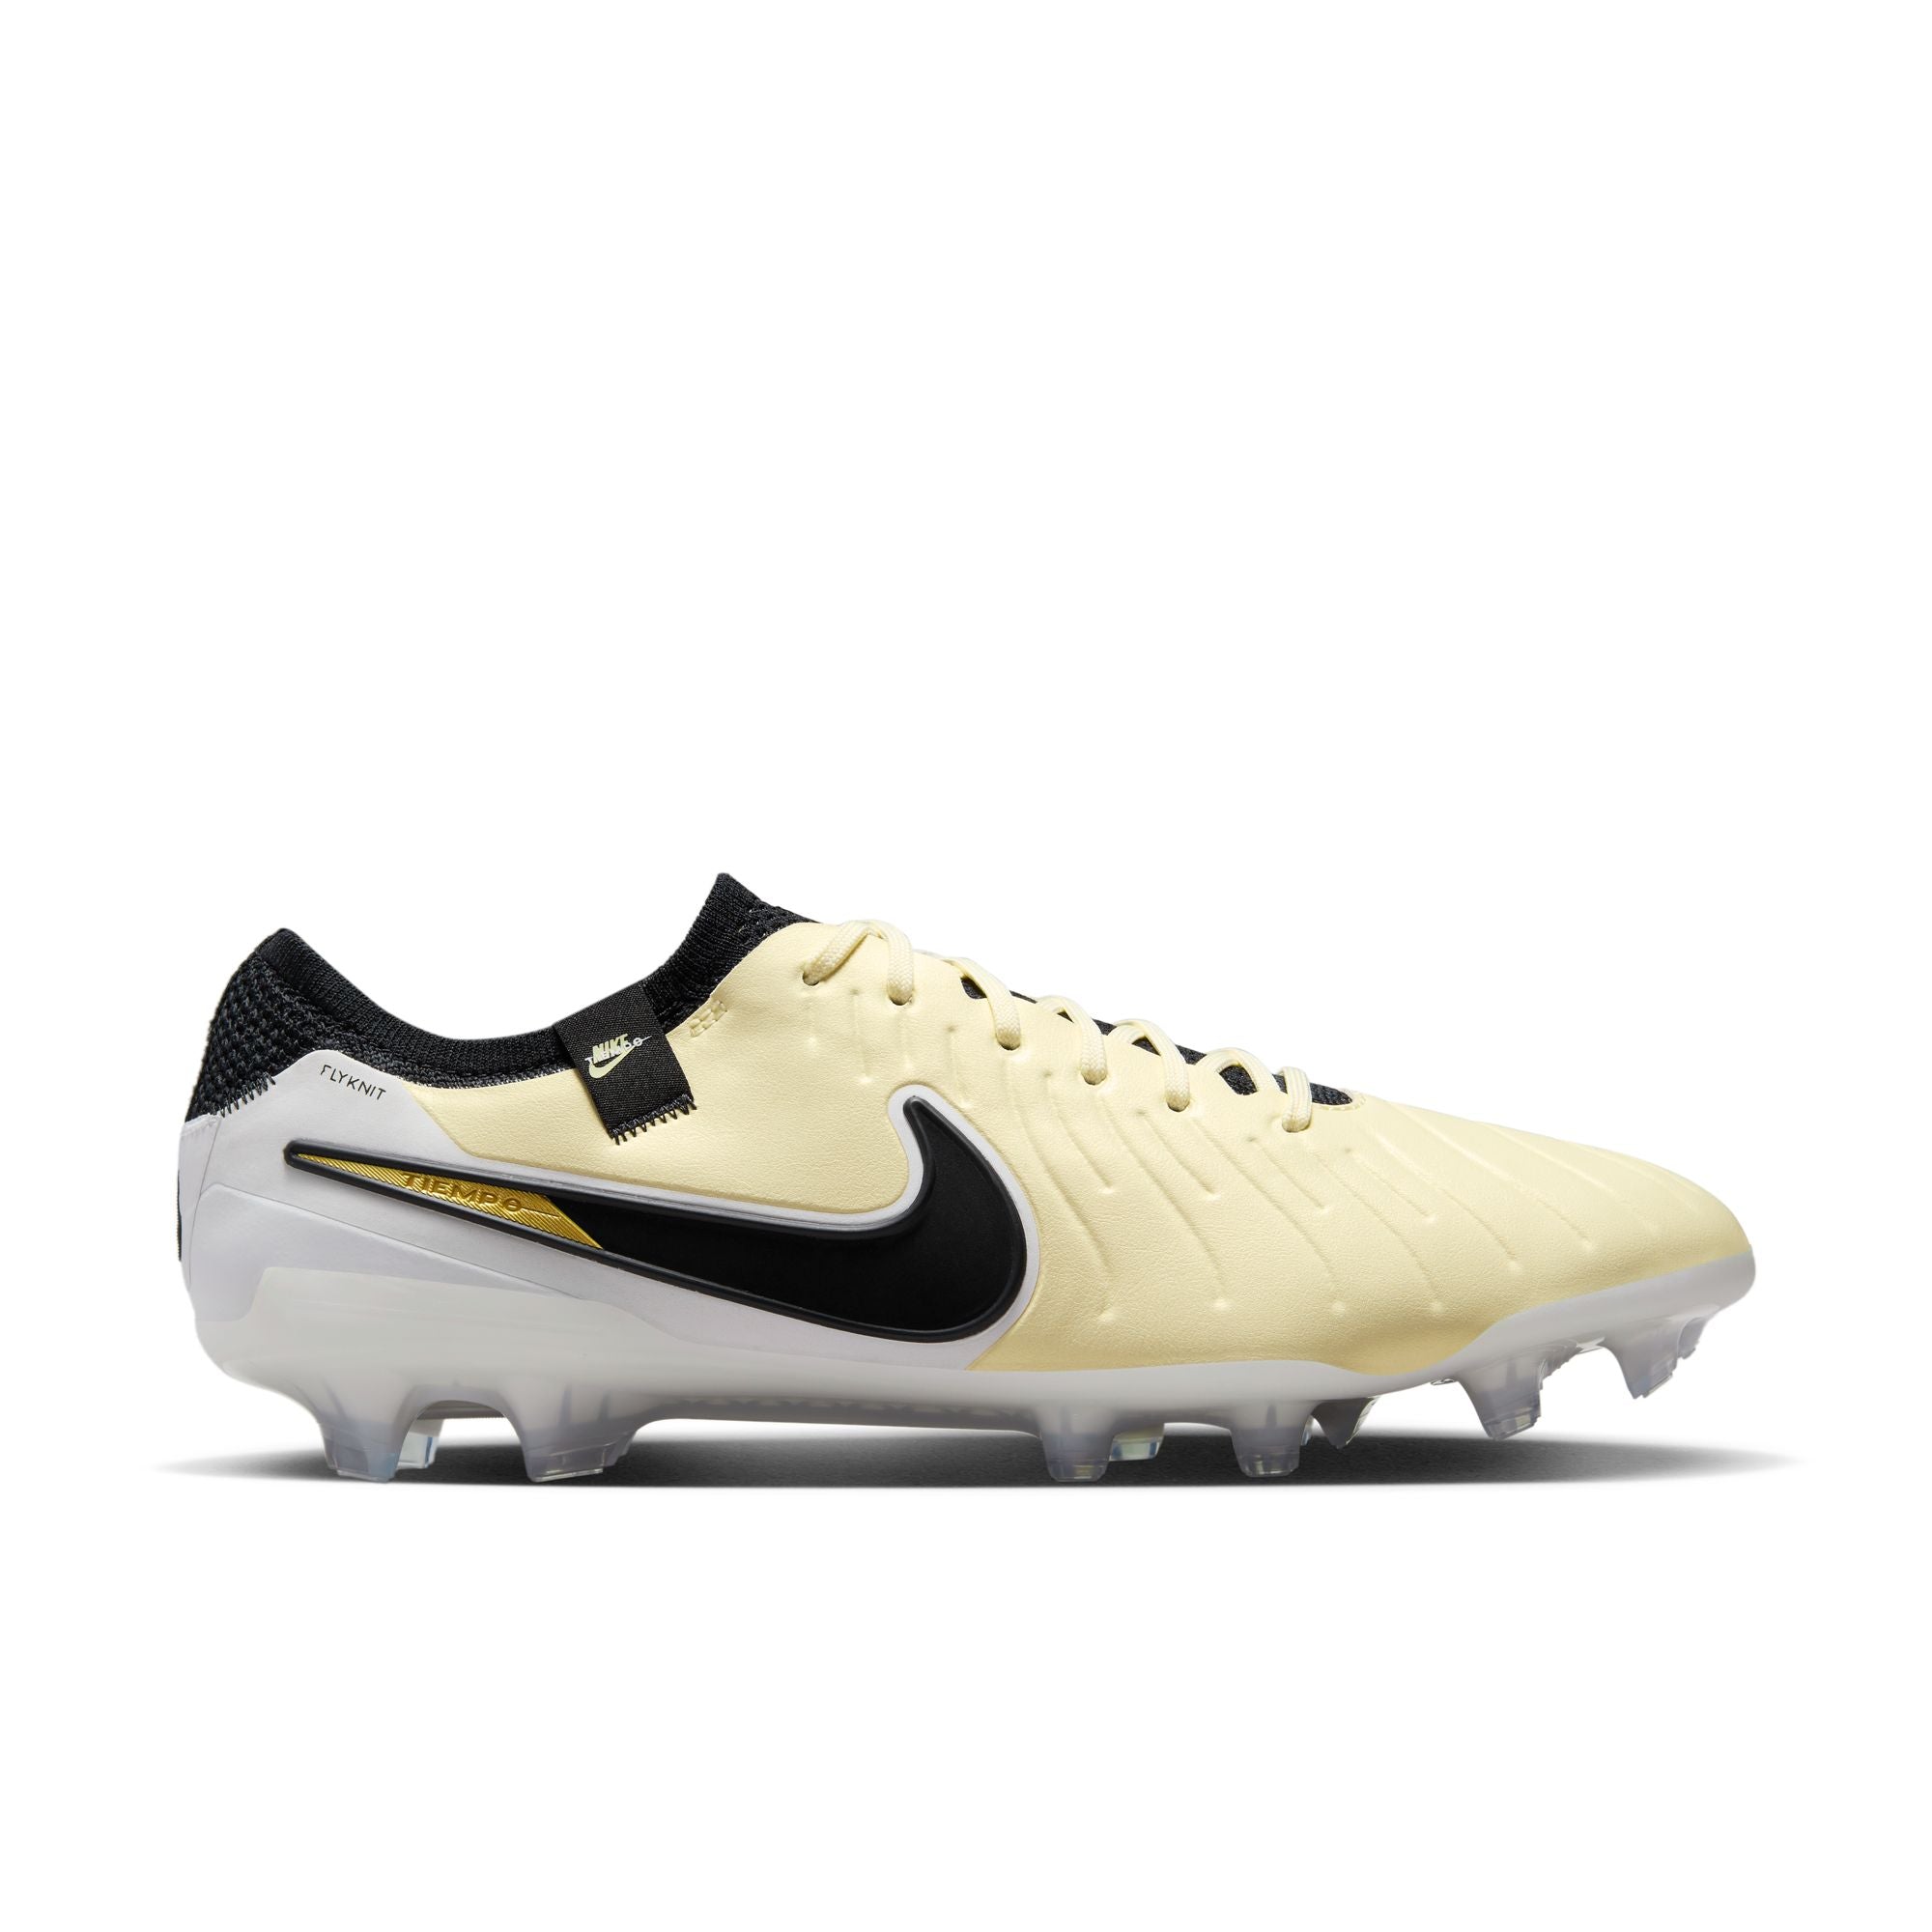 Nike Tiempo Legend 10 Elite Firm-Ground Low-Top Soccer Cleats - Niky's ...